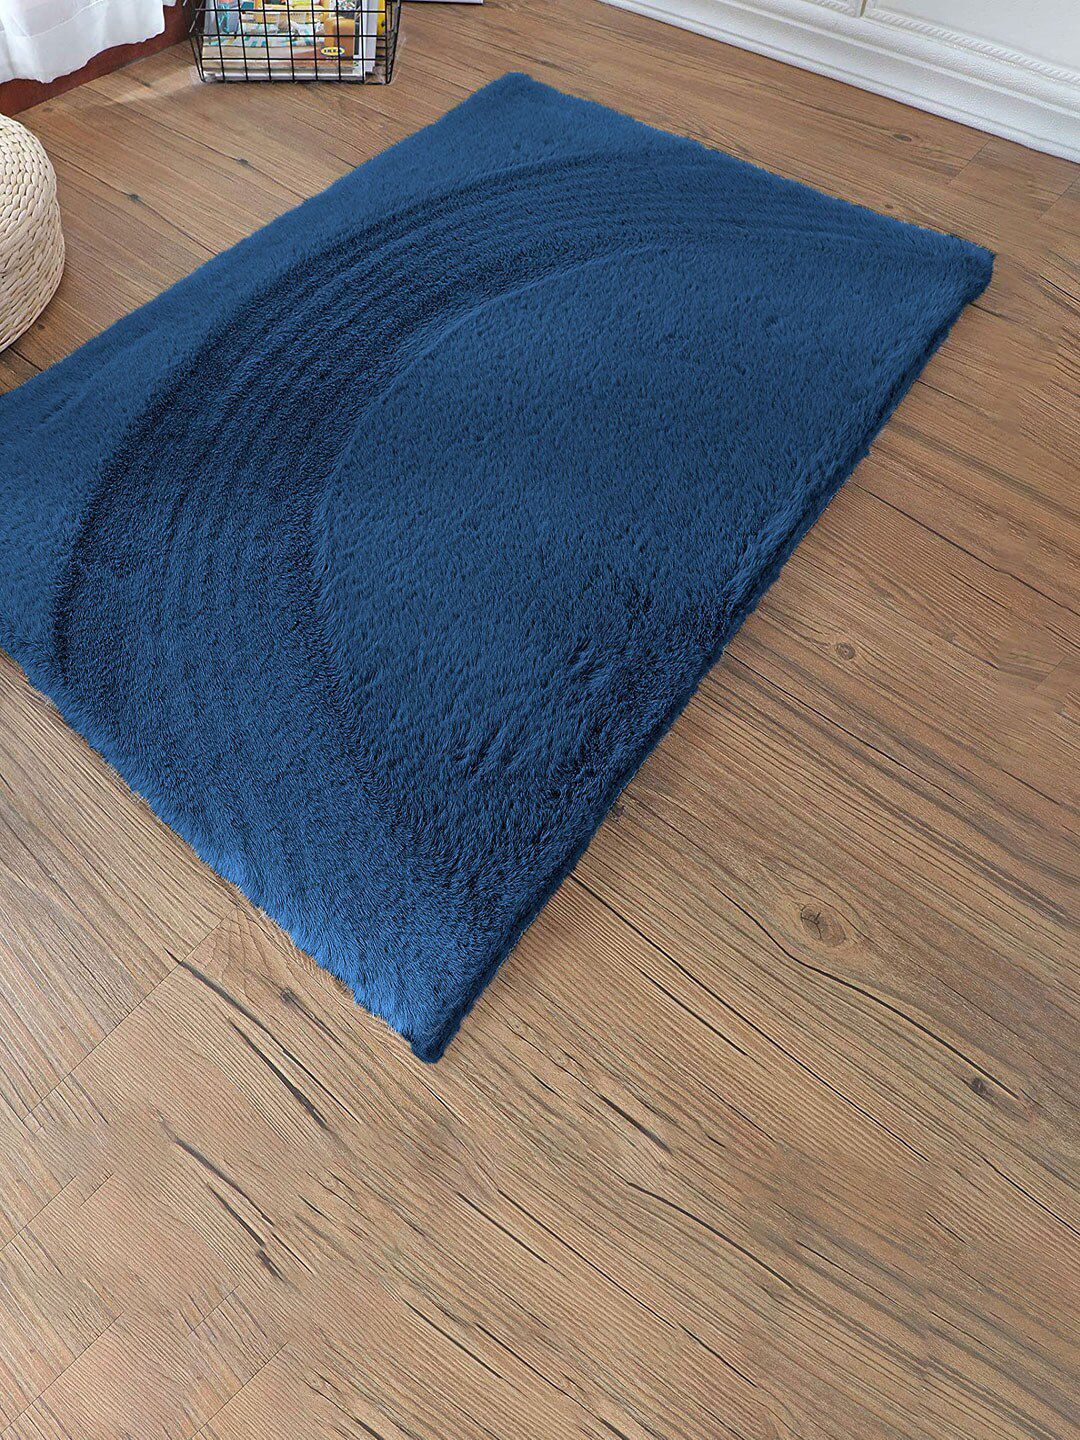 LUXEHOME INTERNATIONAL Teal Blue Solid Ultra Soft Anti-Skid Door Mat Price in India